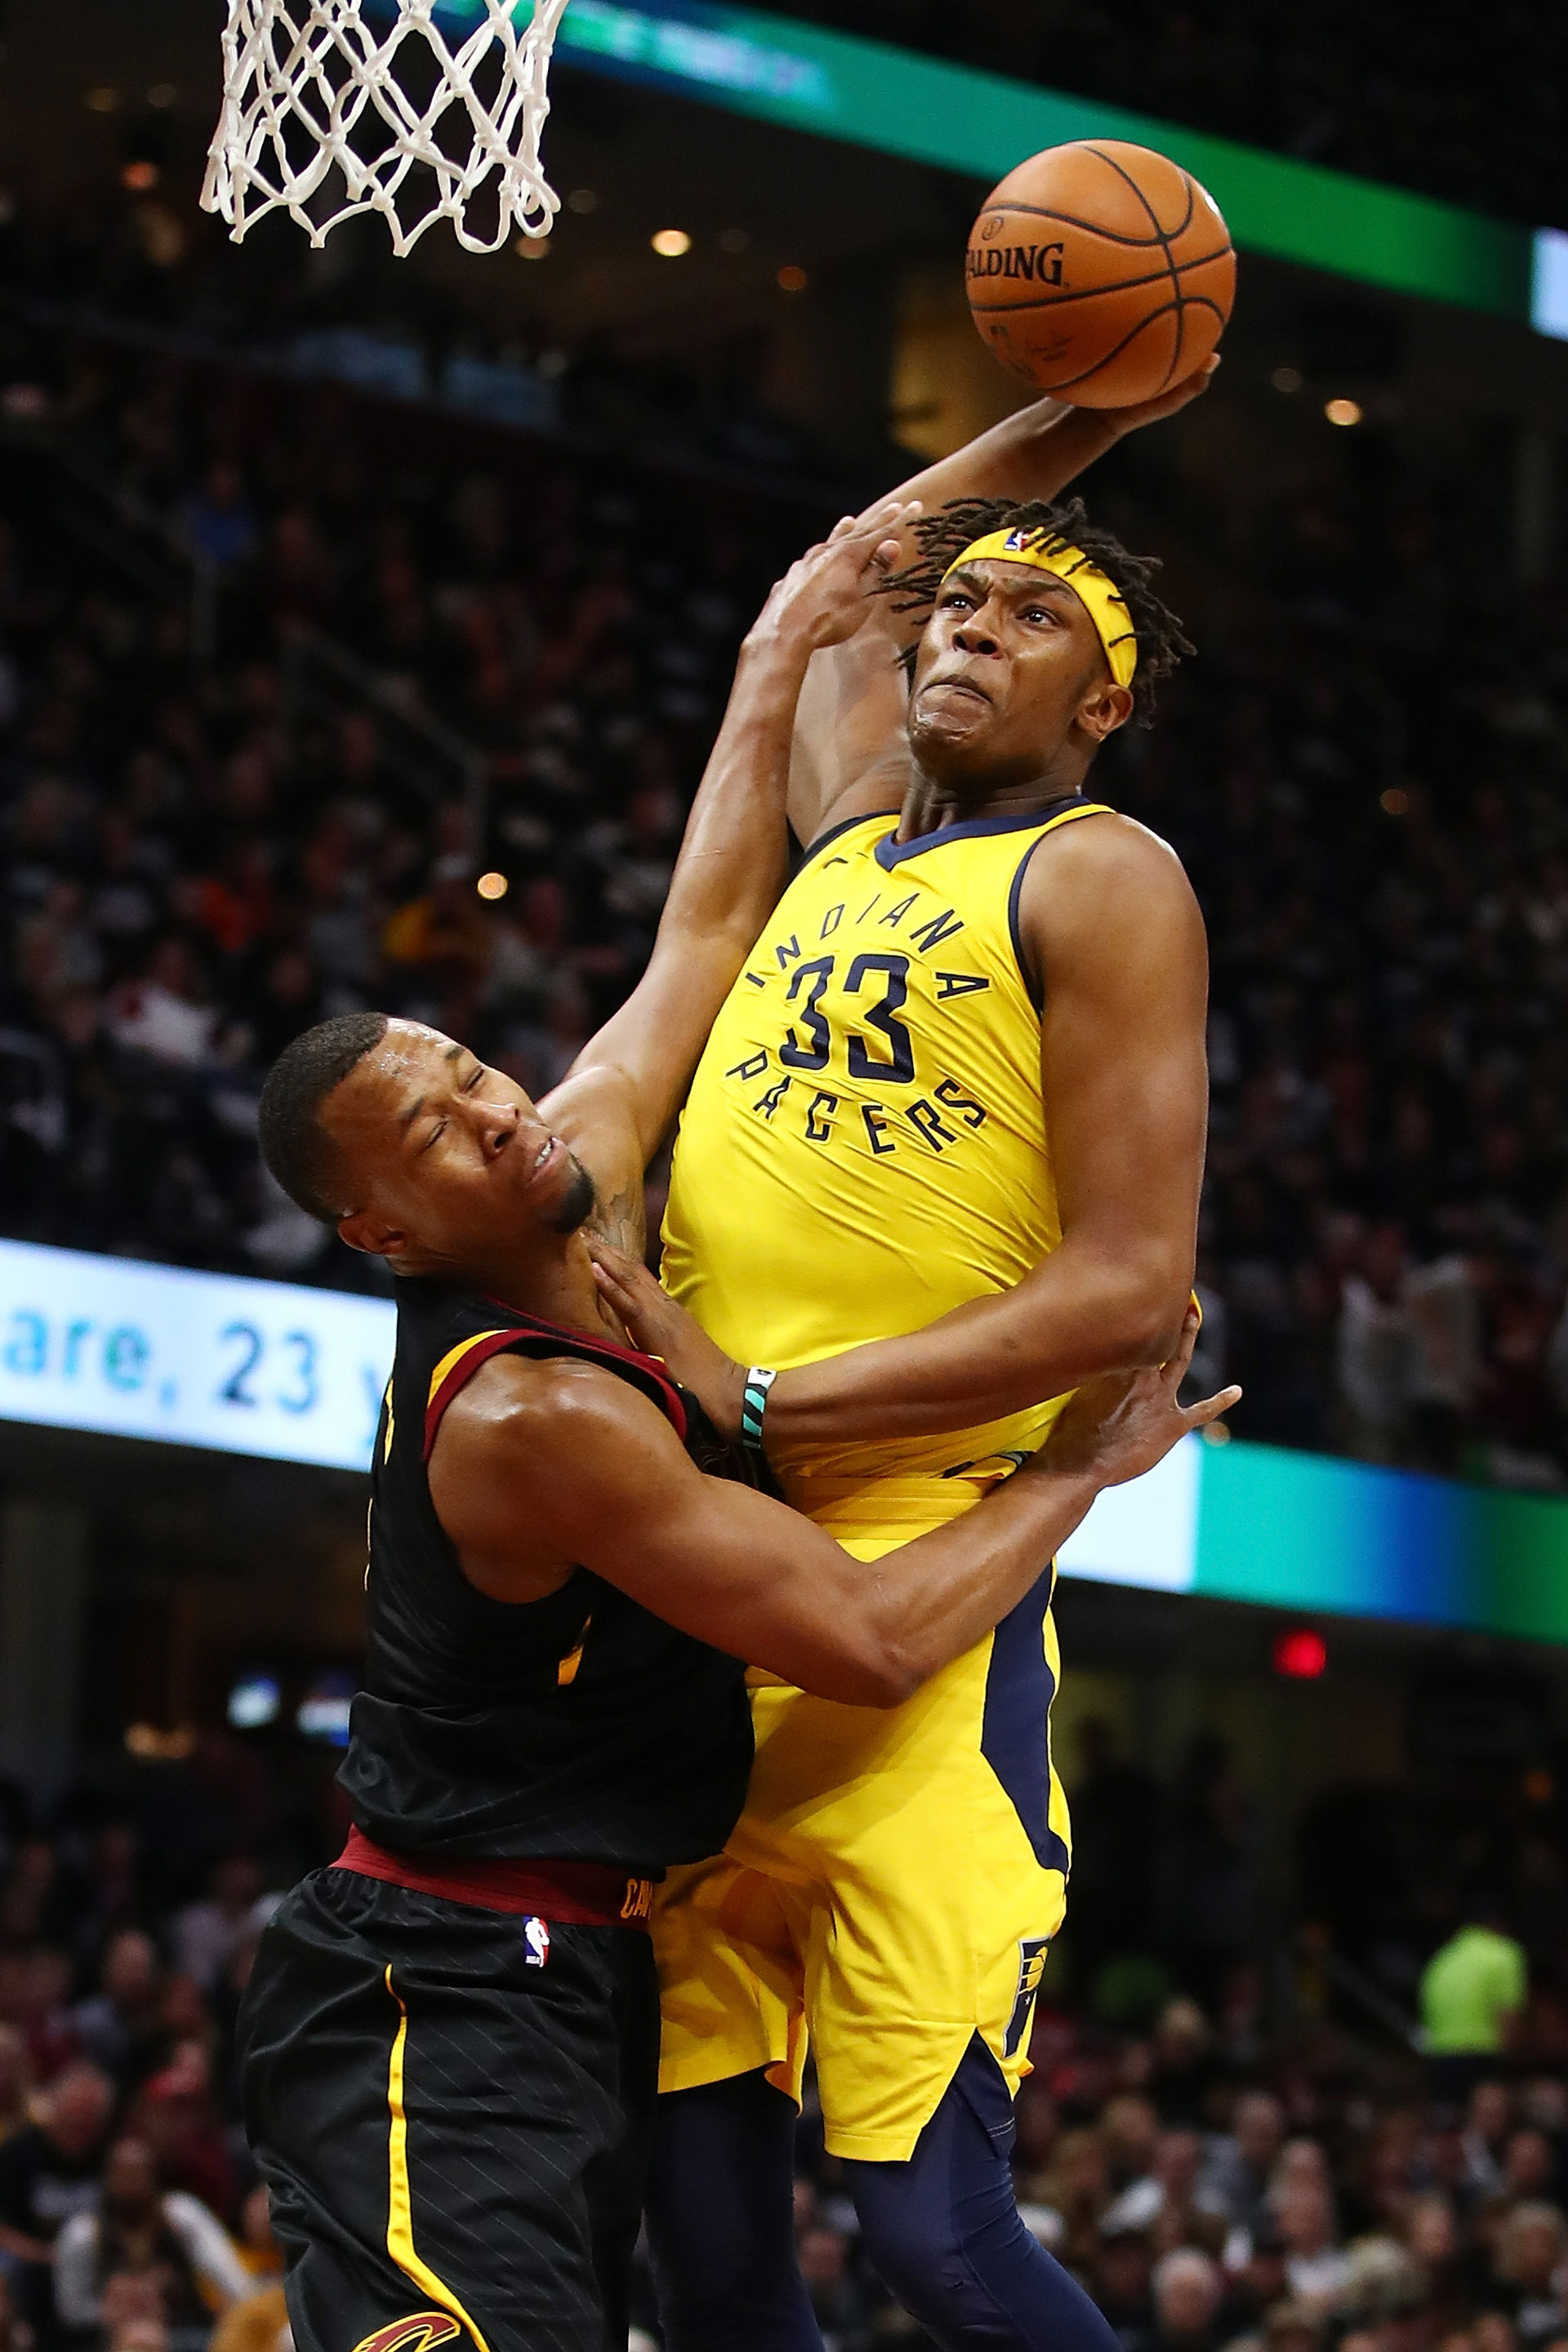 Myles Turner #33 of the Indiana Pacers dunks past Rodney Hood #1 of the Cleveland Cavaliers